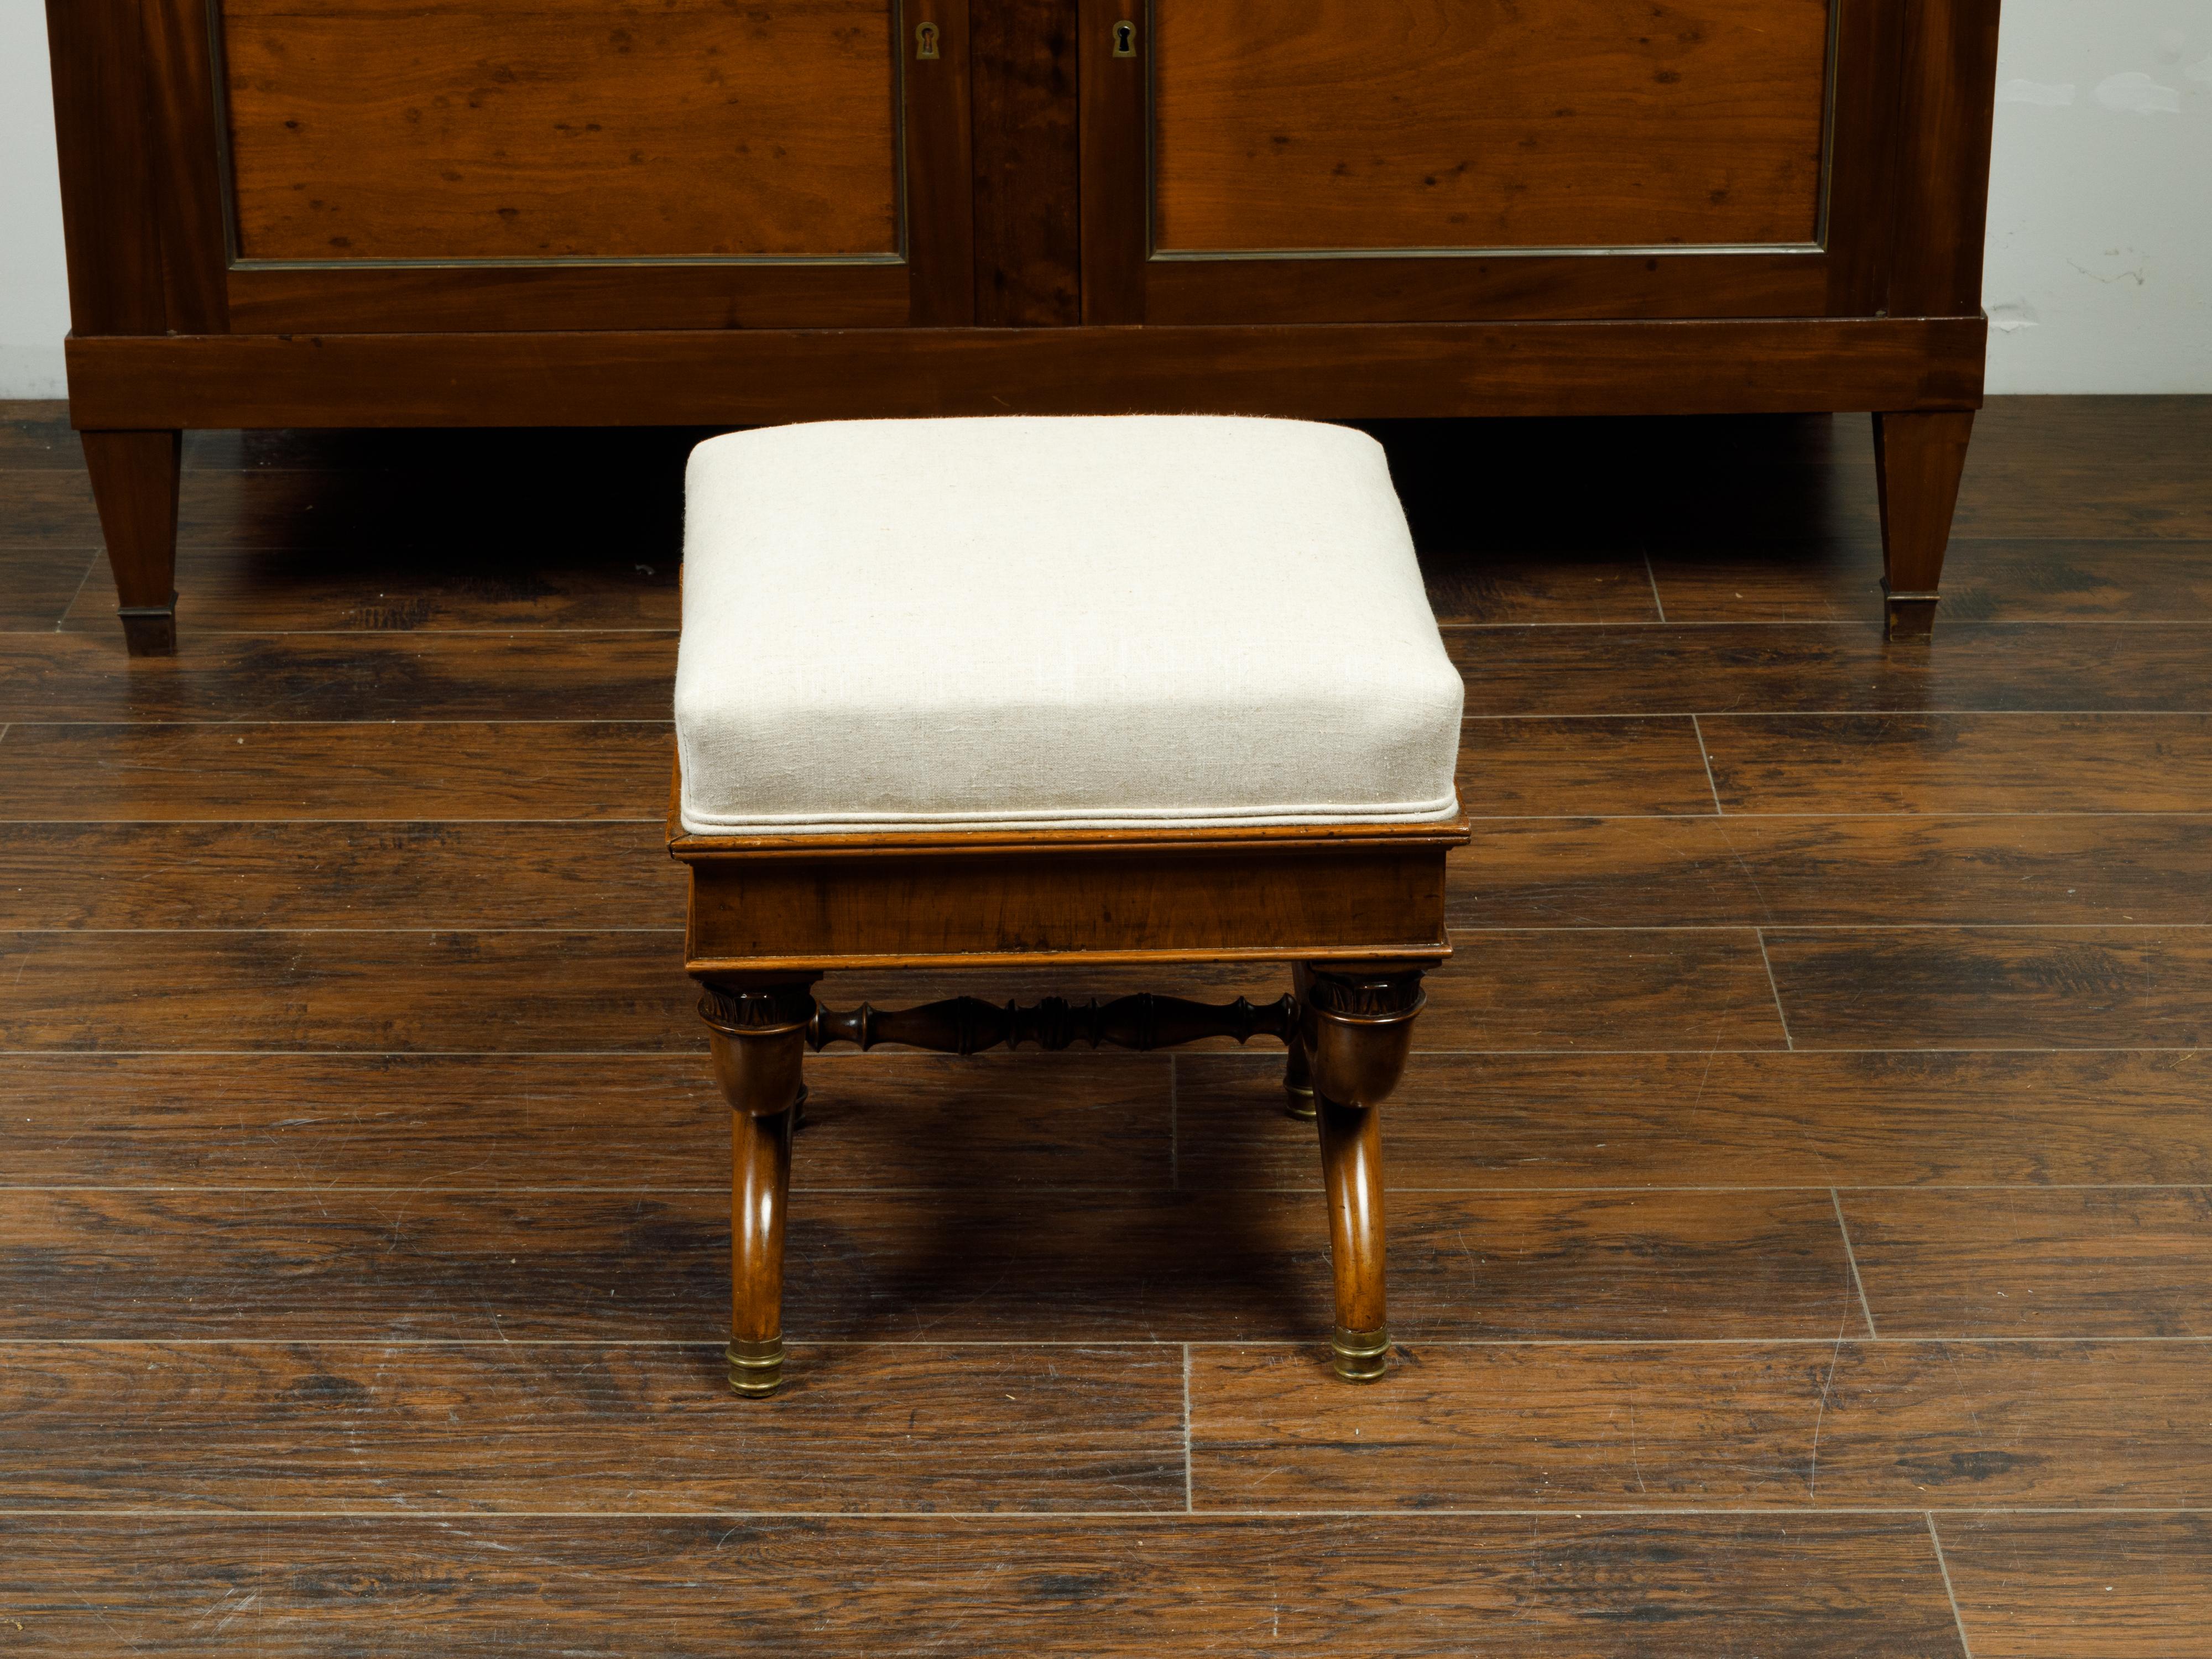 A French walnut X-form curule stool from the 19th century, with Corinthian capitals and new upholstery. Created in France during the 19th century, this walnut stool features a square seat newly reupholstered with a neutral toned double welt fabric